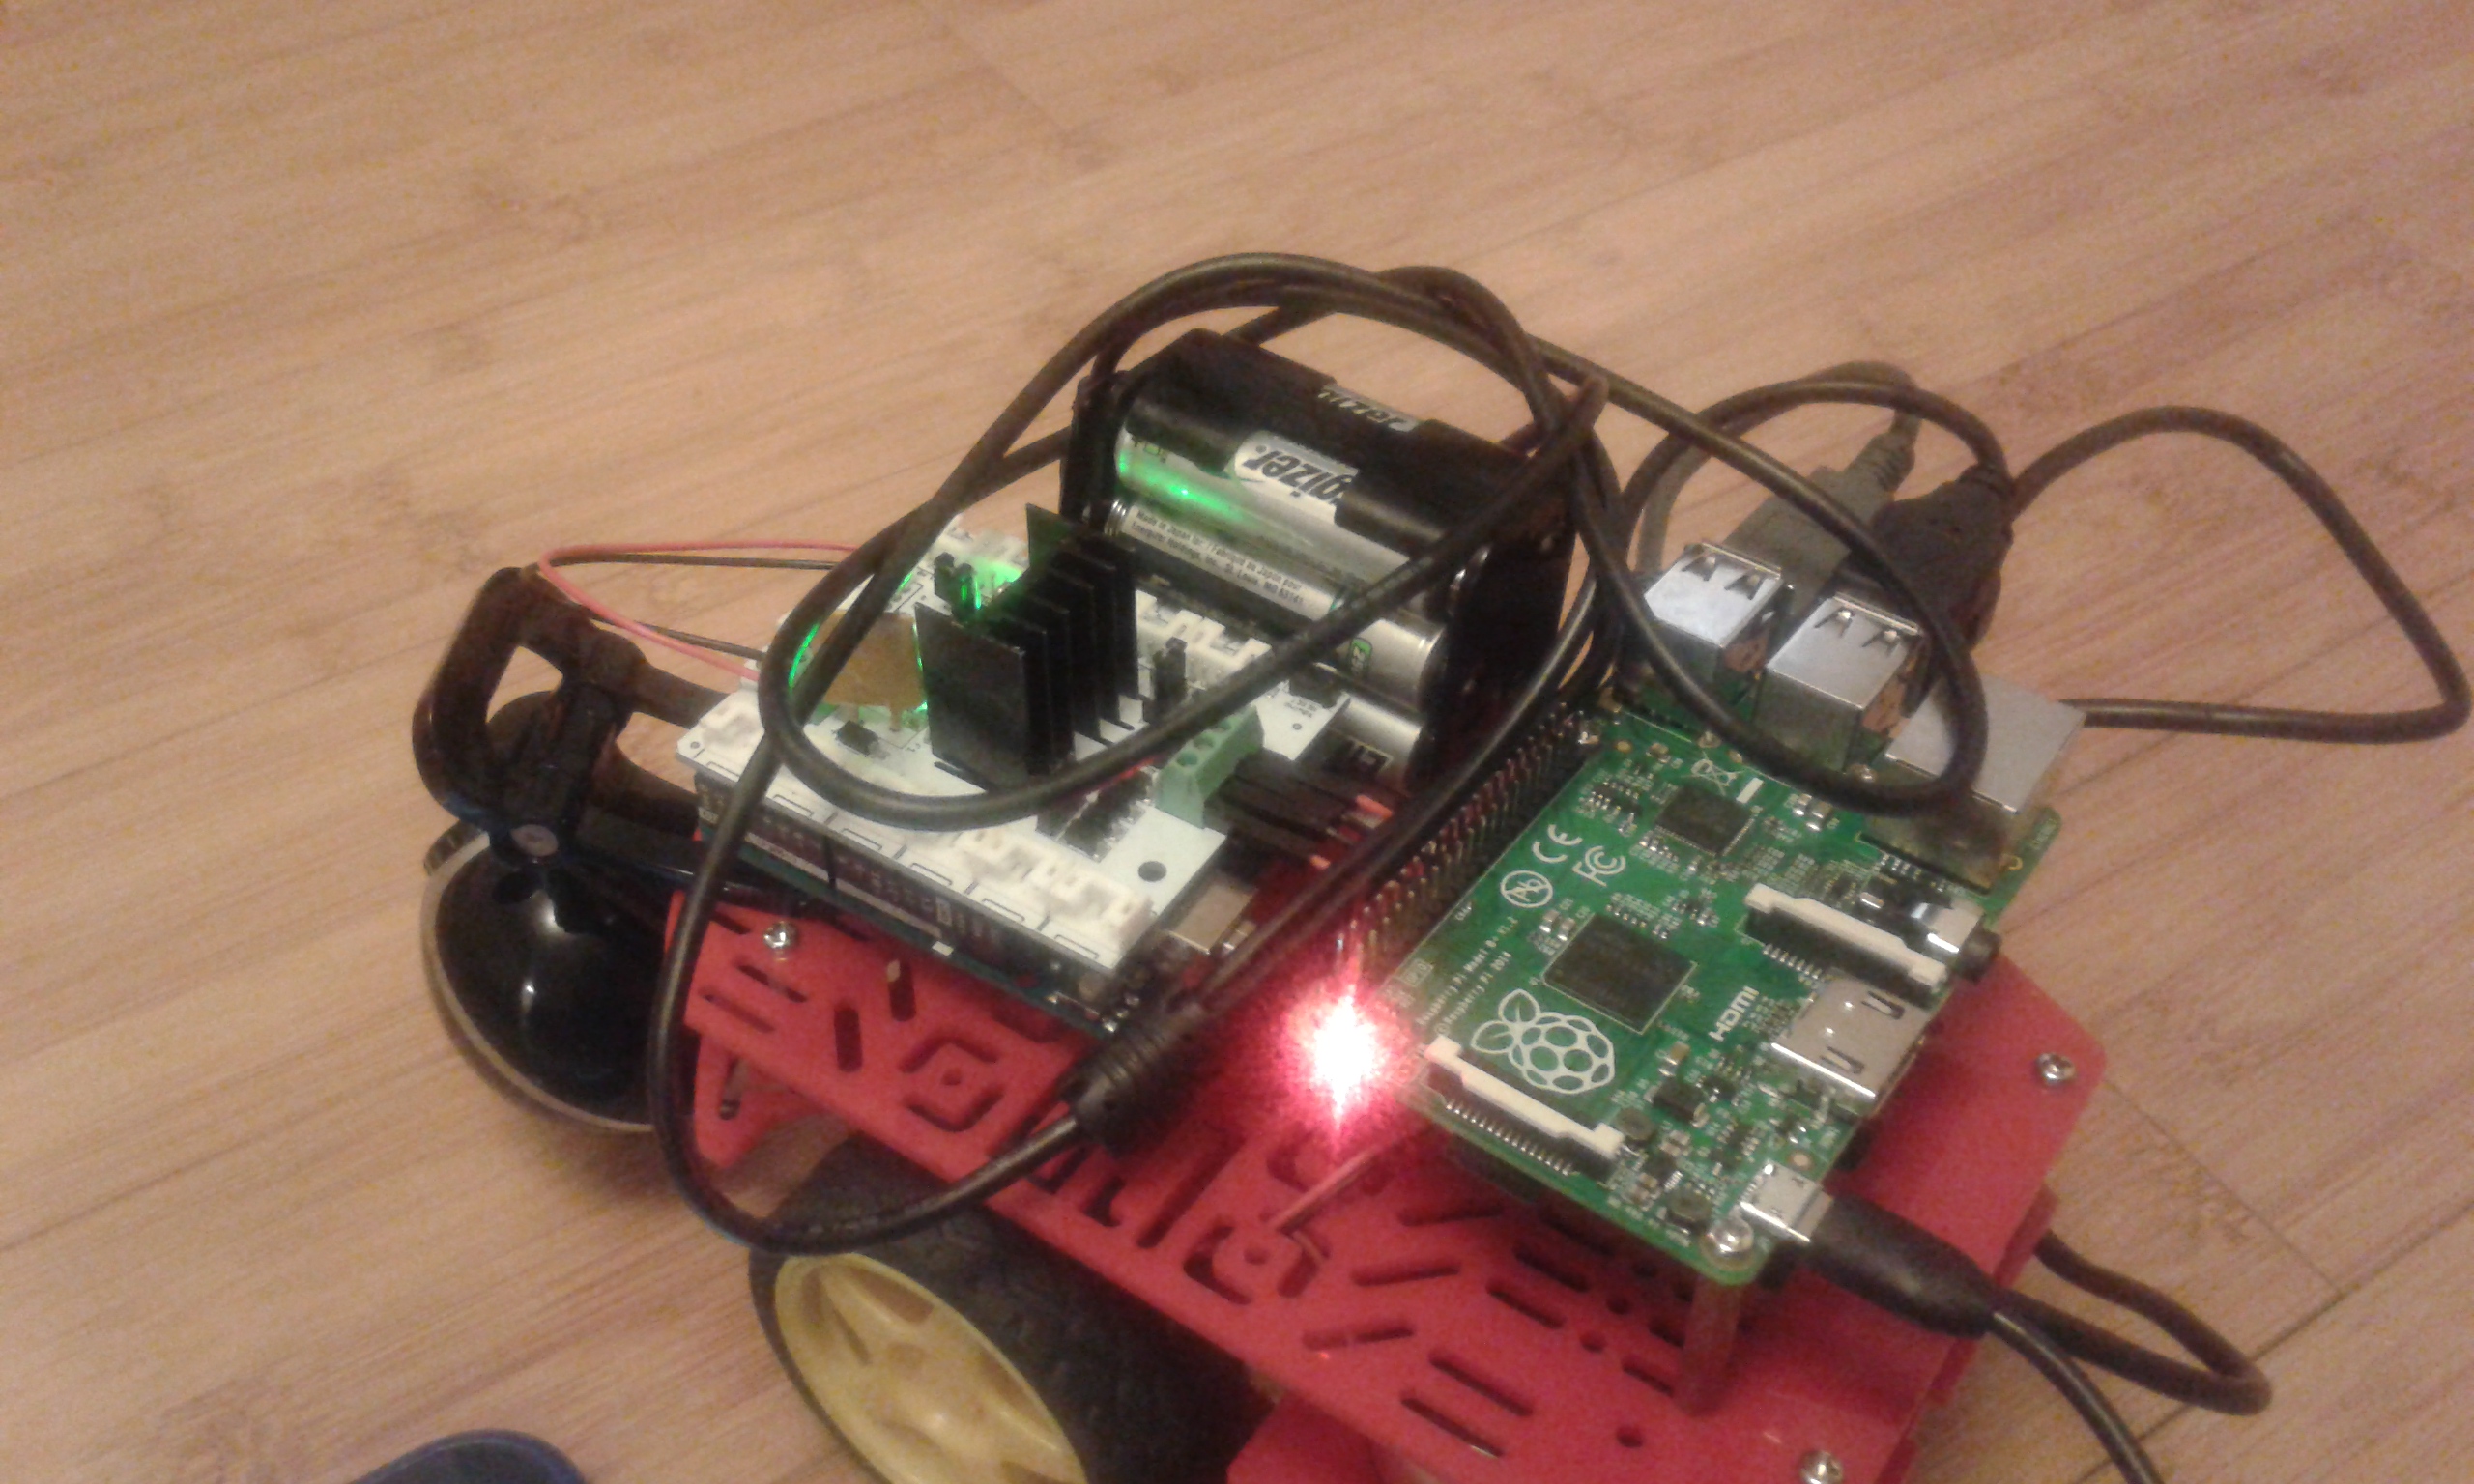 Another side view showing USB connectors (on the far side). The battery pack on top is used by the motor shield to provide power to the motors.